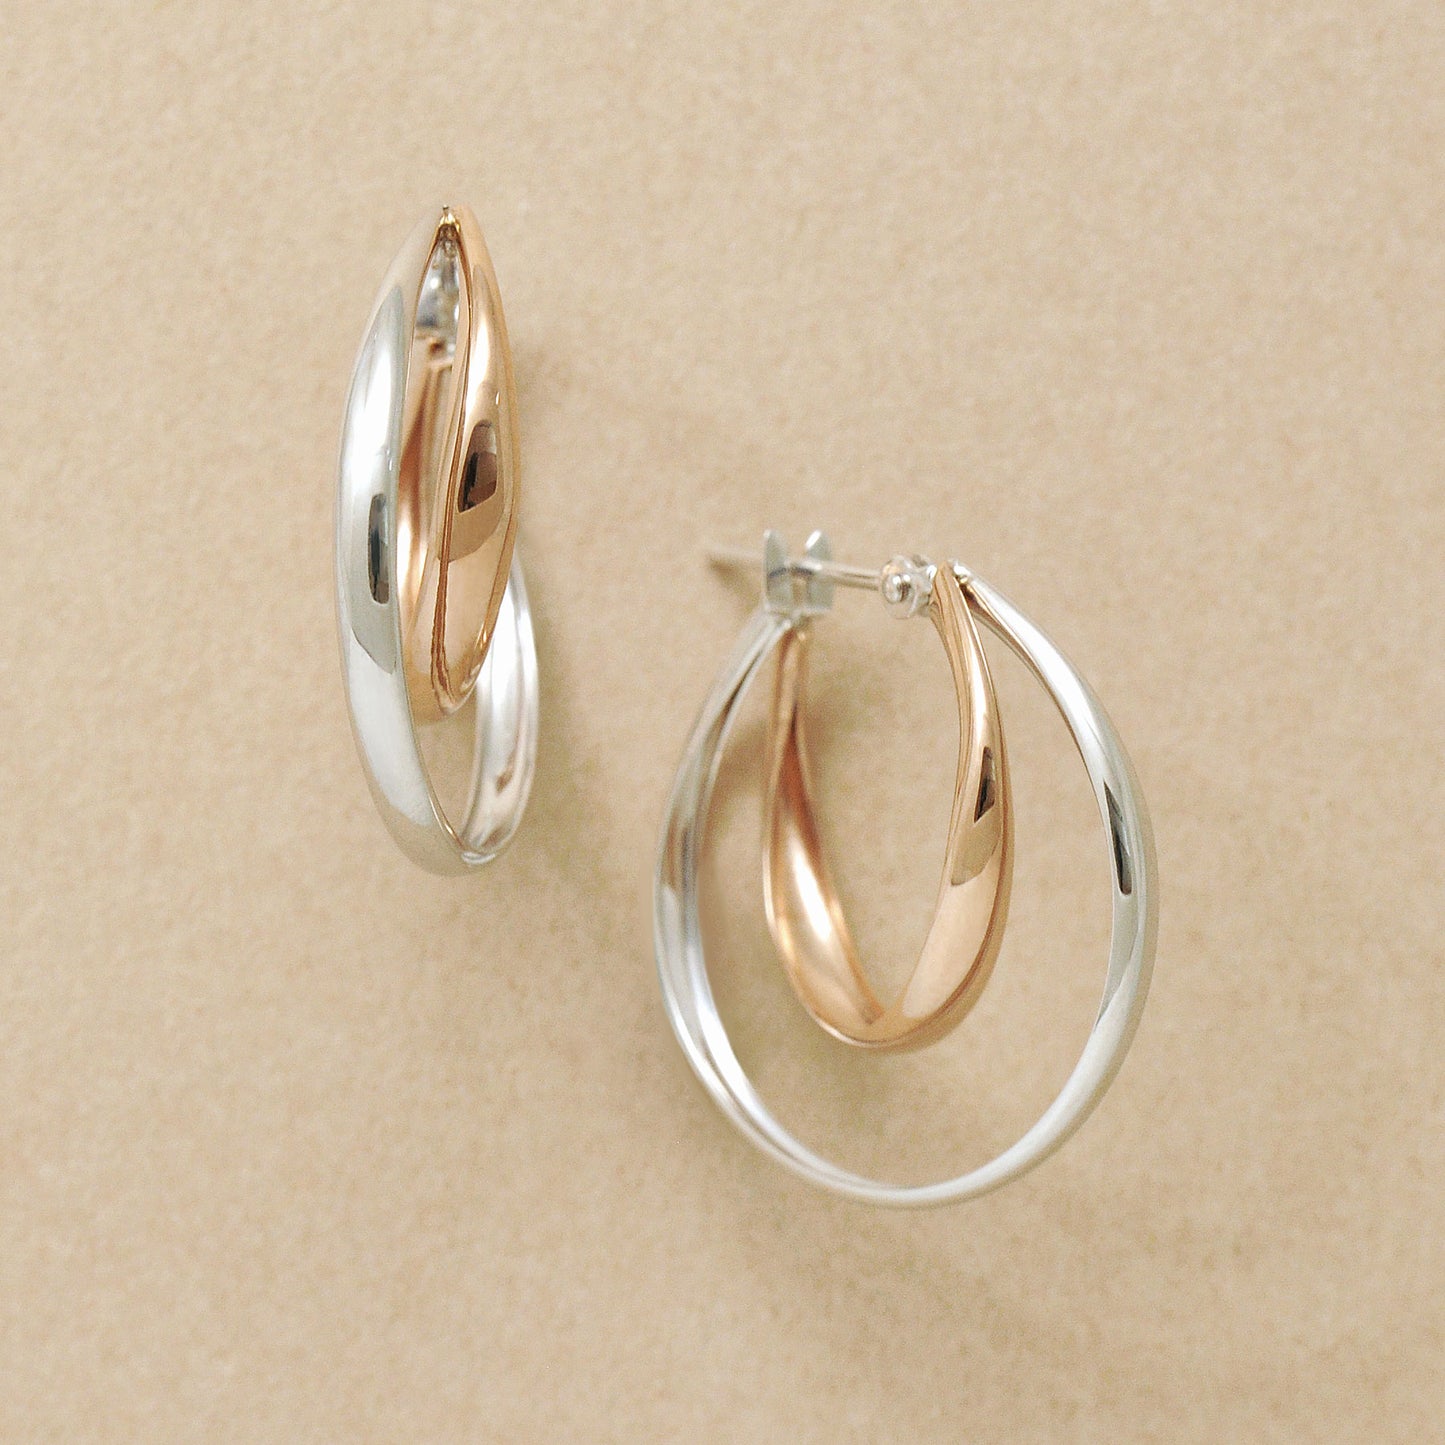 14K/10K Round Double Hoop Earrings (White Gold / Rose Gold) - Product Image